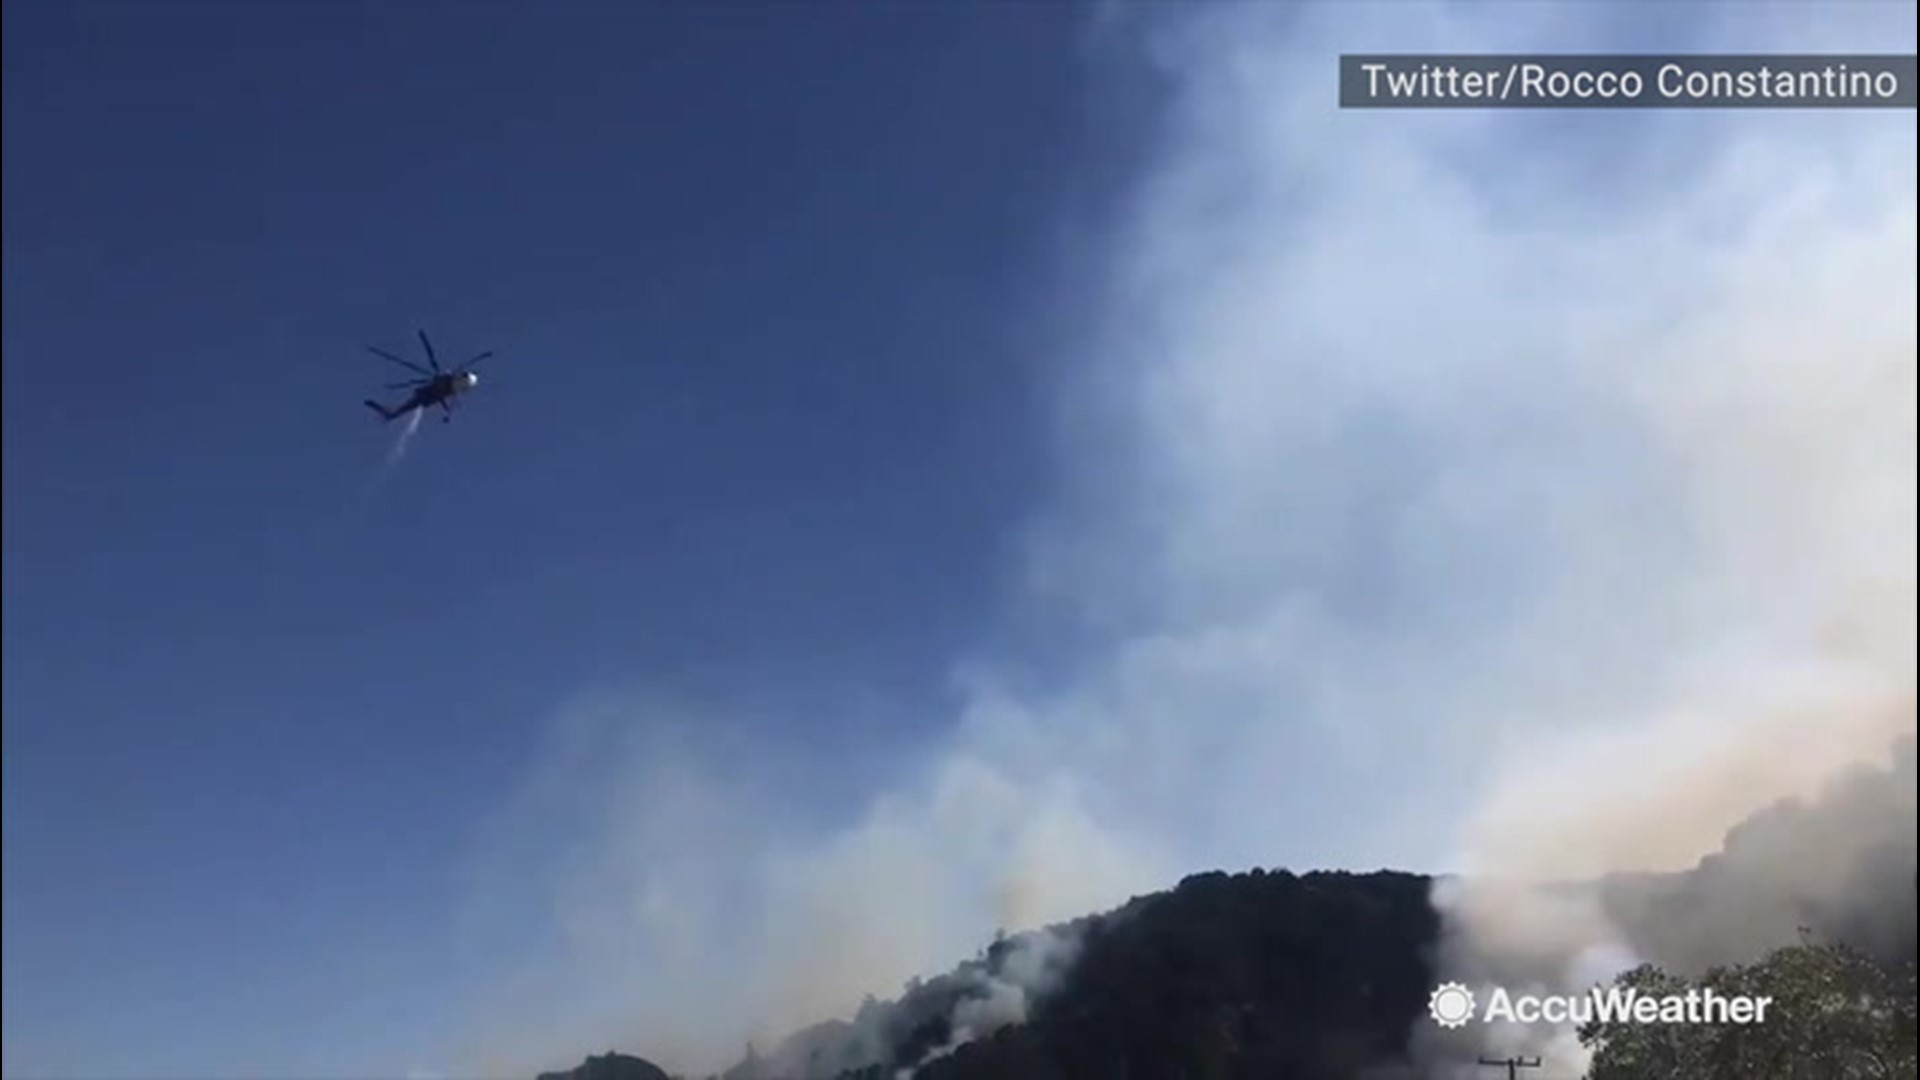 A wildfire broke out close to a highway in Santa Clarita, California, on Oct. 12. A helicopter was spotted dumping retardant on the wildfire to try and contain it.